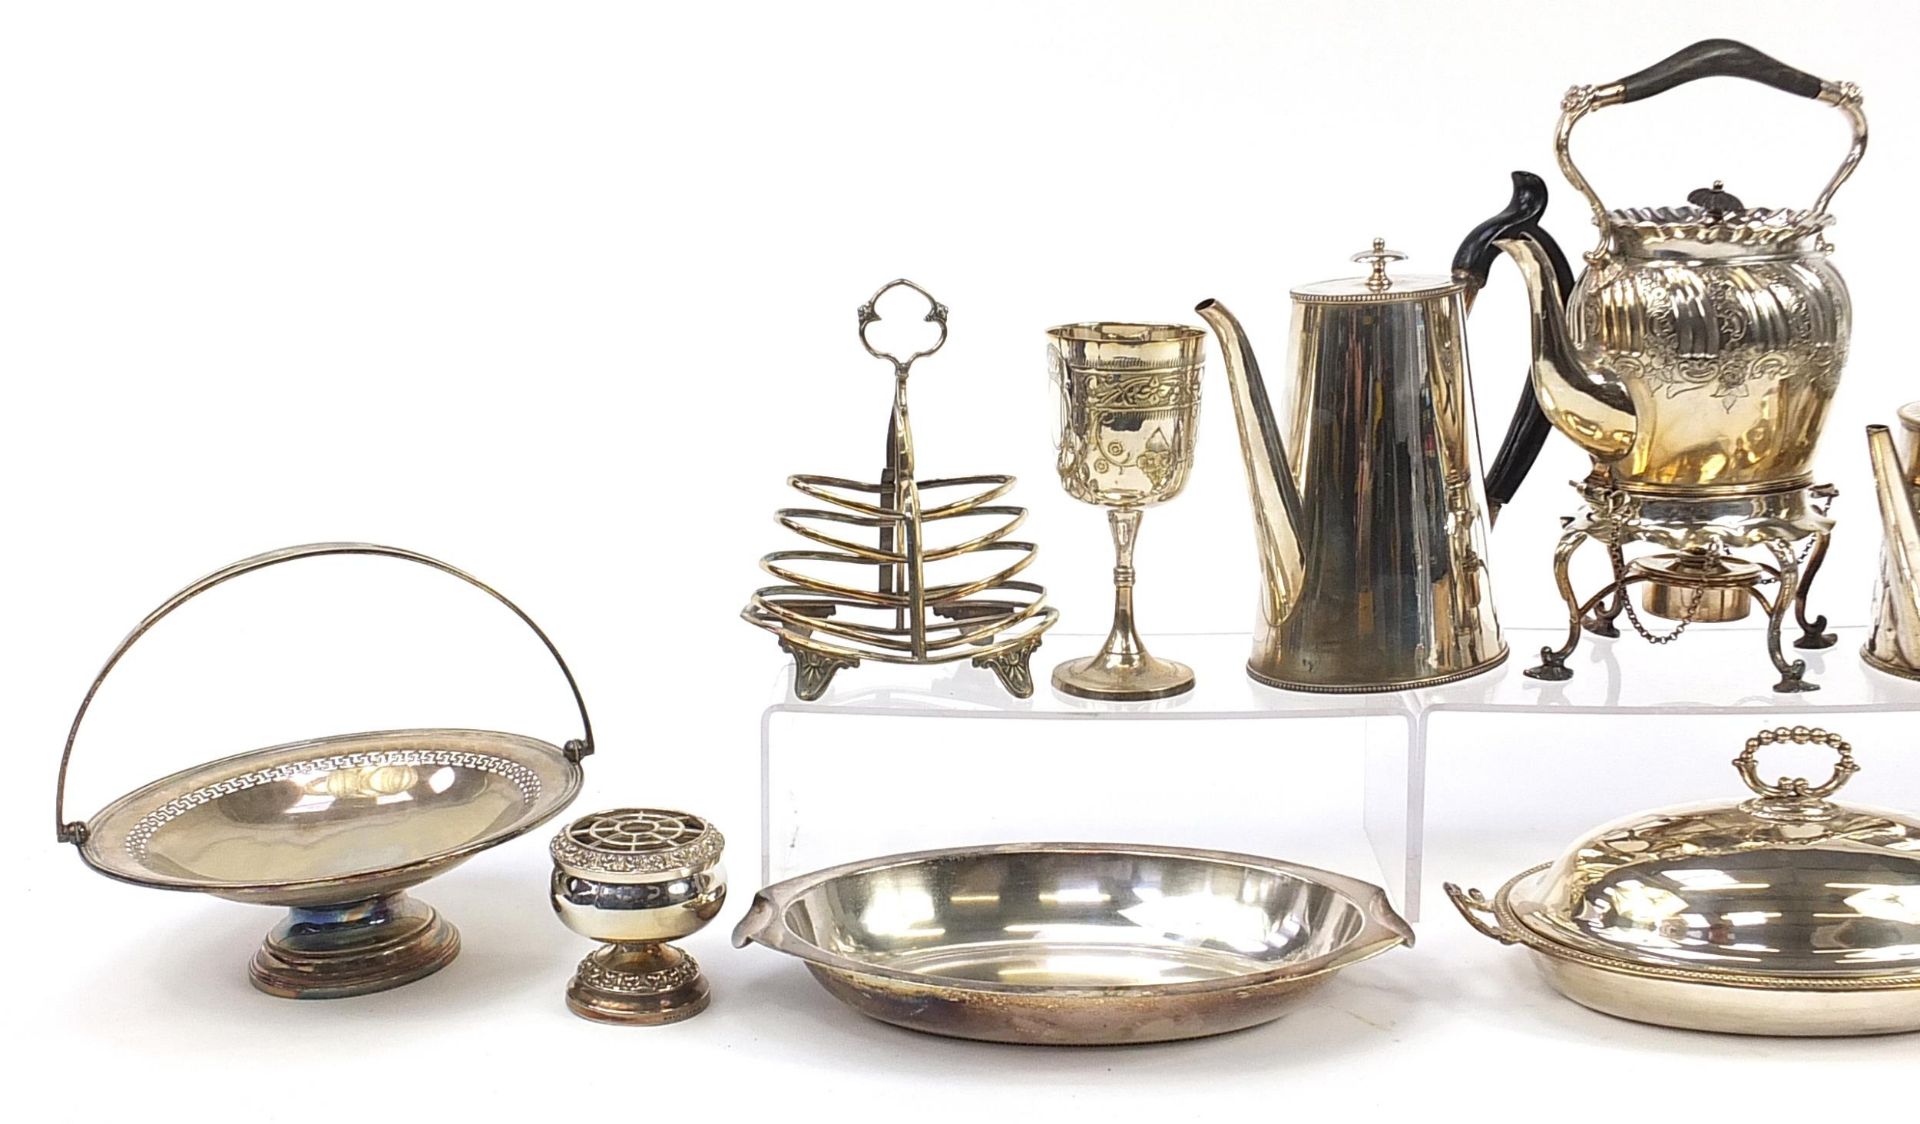 Antique and later silverplate including a Victorian teapot on stand, fruit baskets with swing - Image 2 of 4